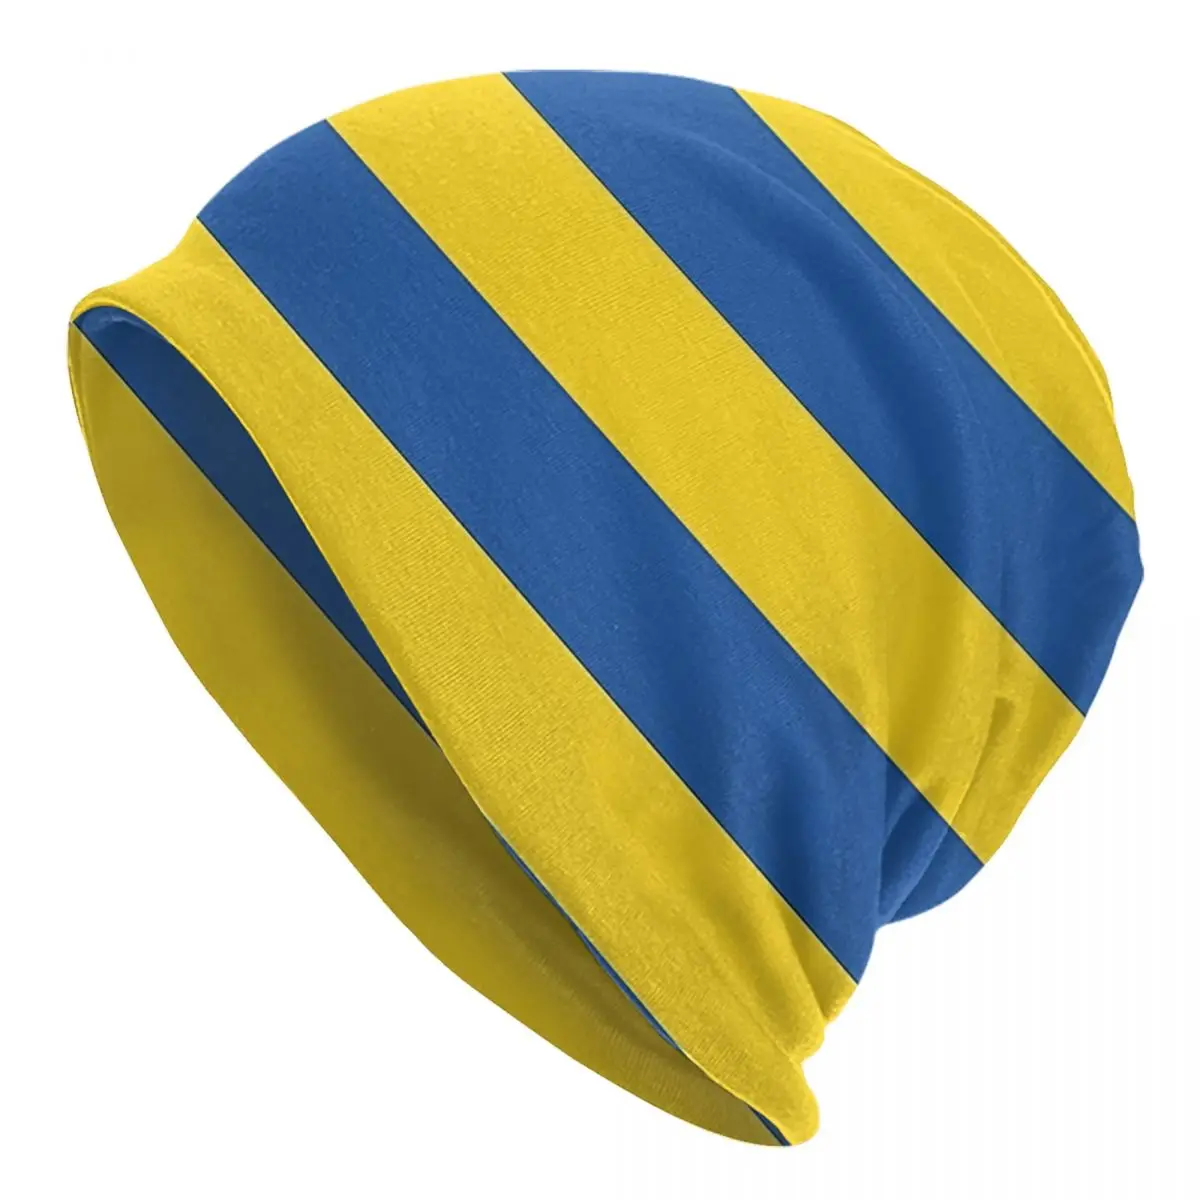 Flag Of Ukraine Adult Men's Women's Knit Hat Keep warm winter Funny knitted hat